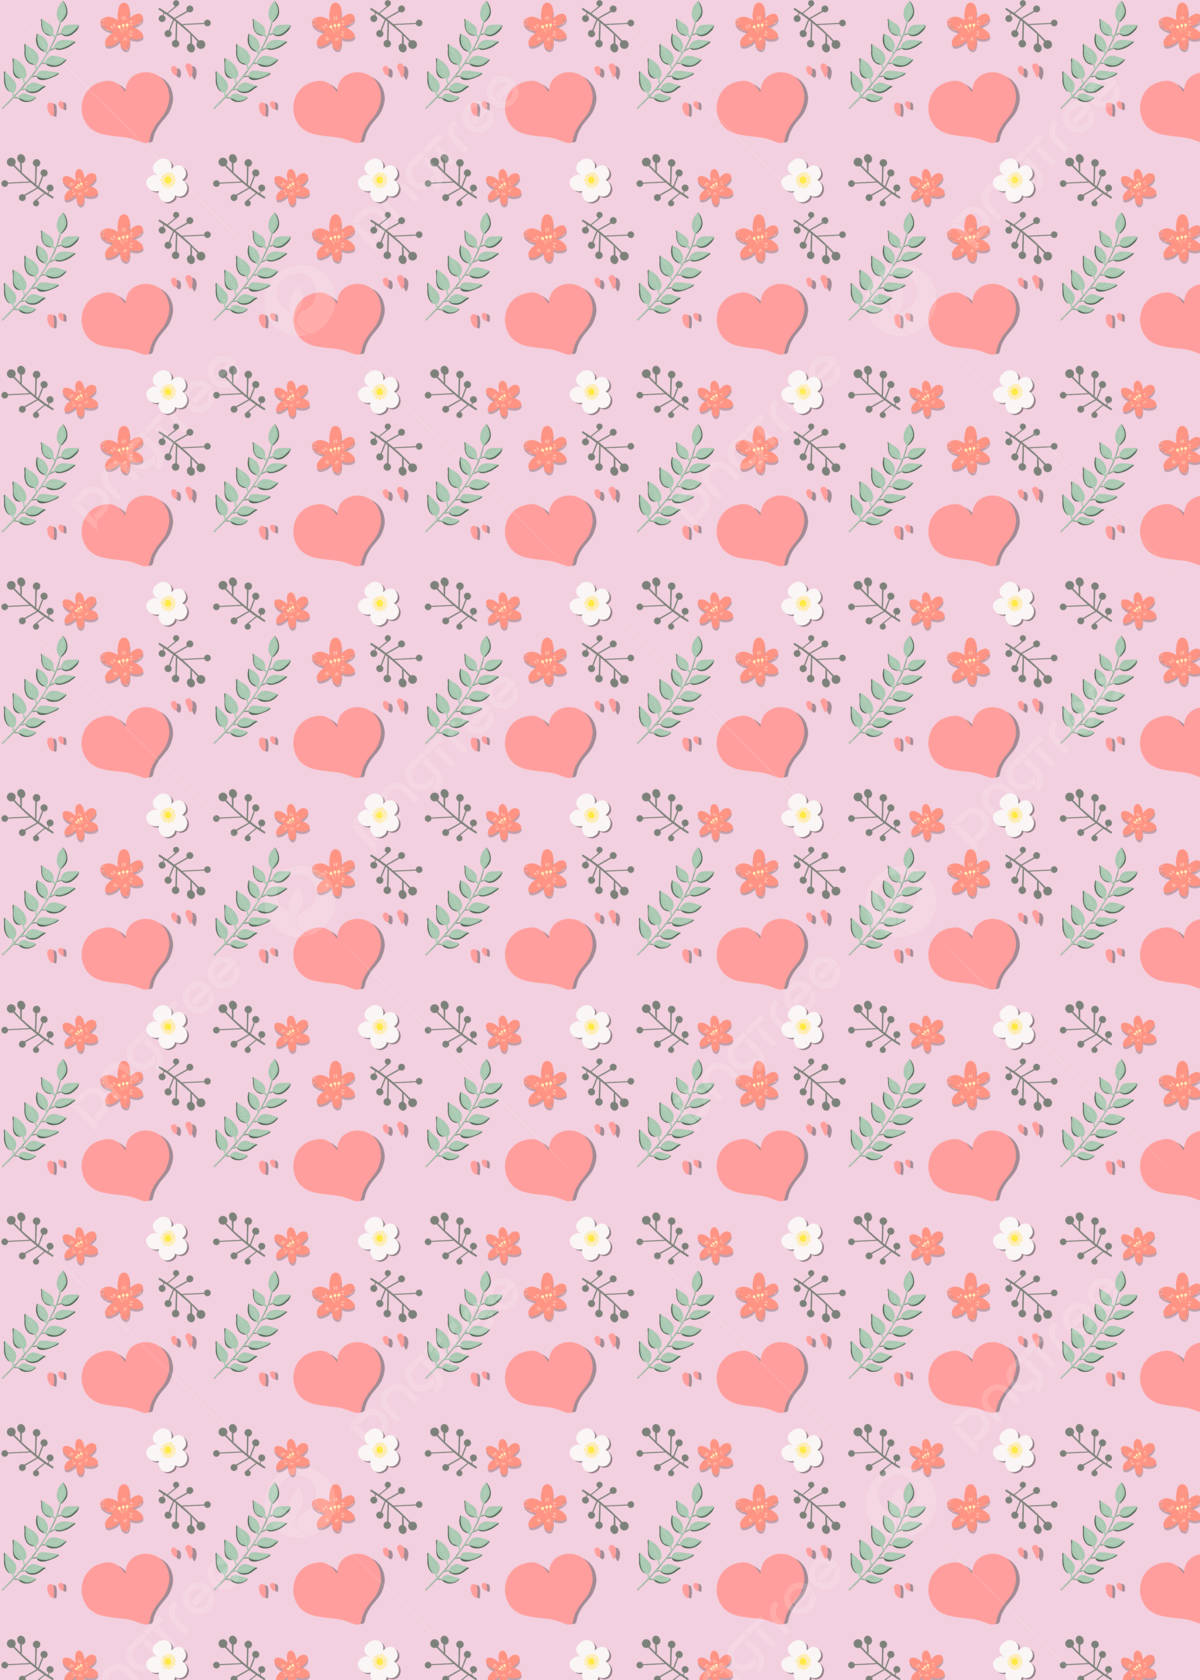 Celebrate Valentines Day with a touch of whimsy Wallpaper